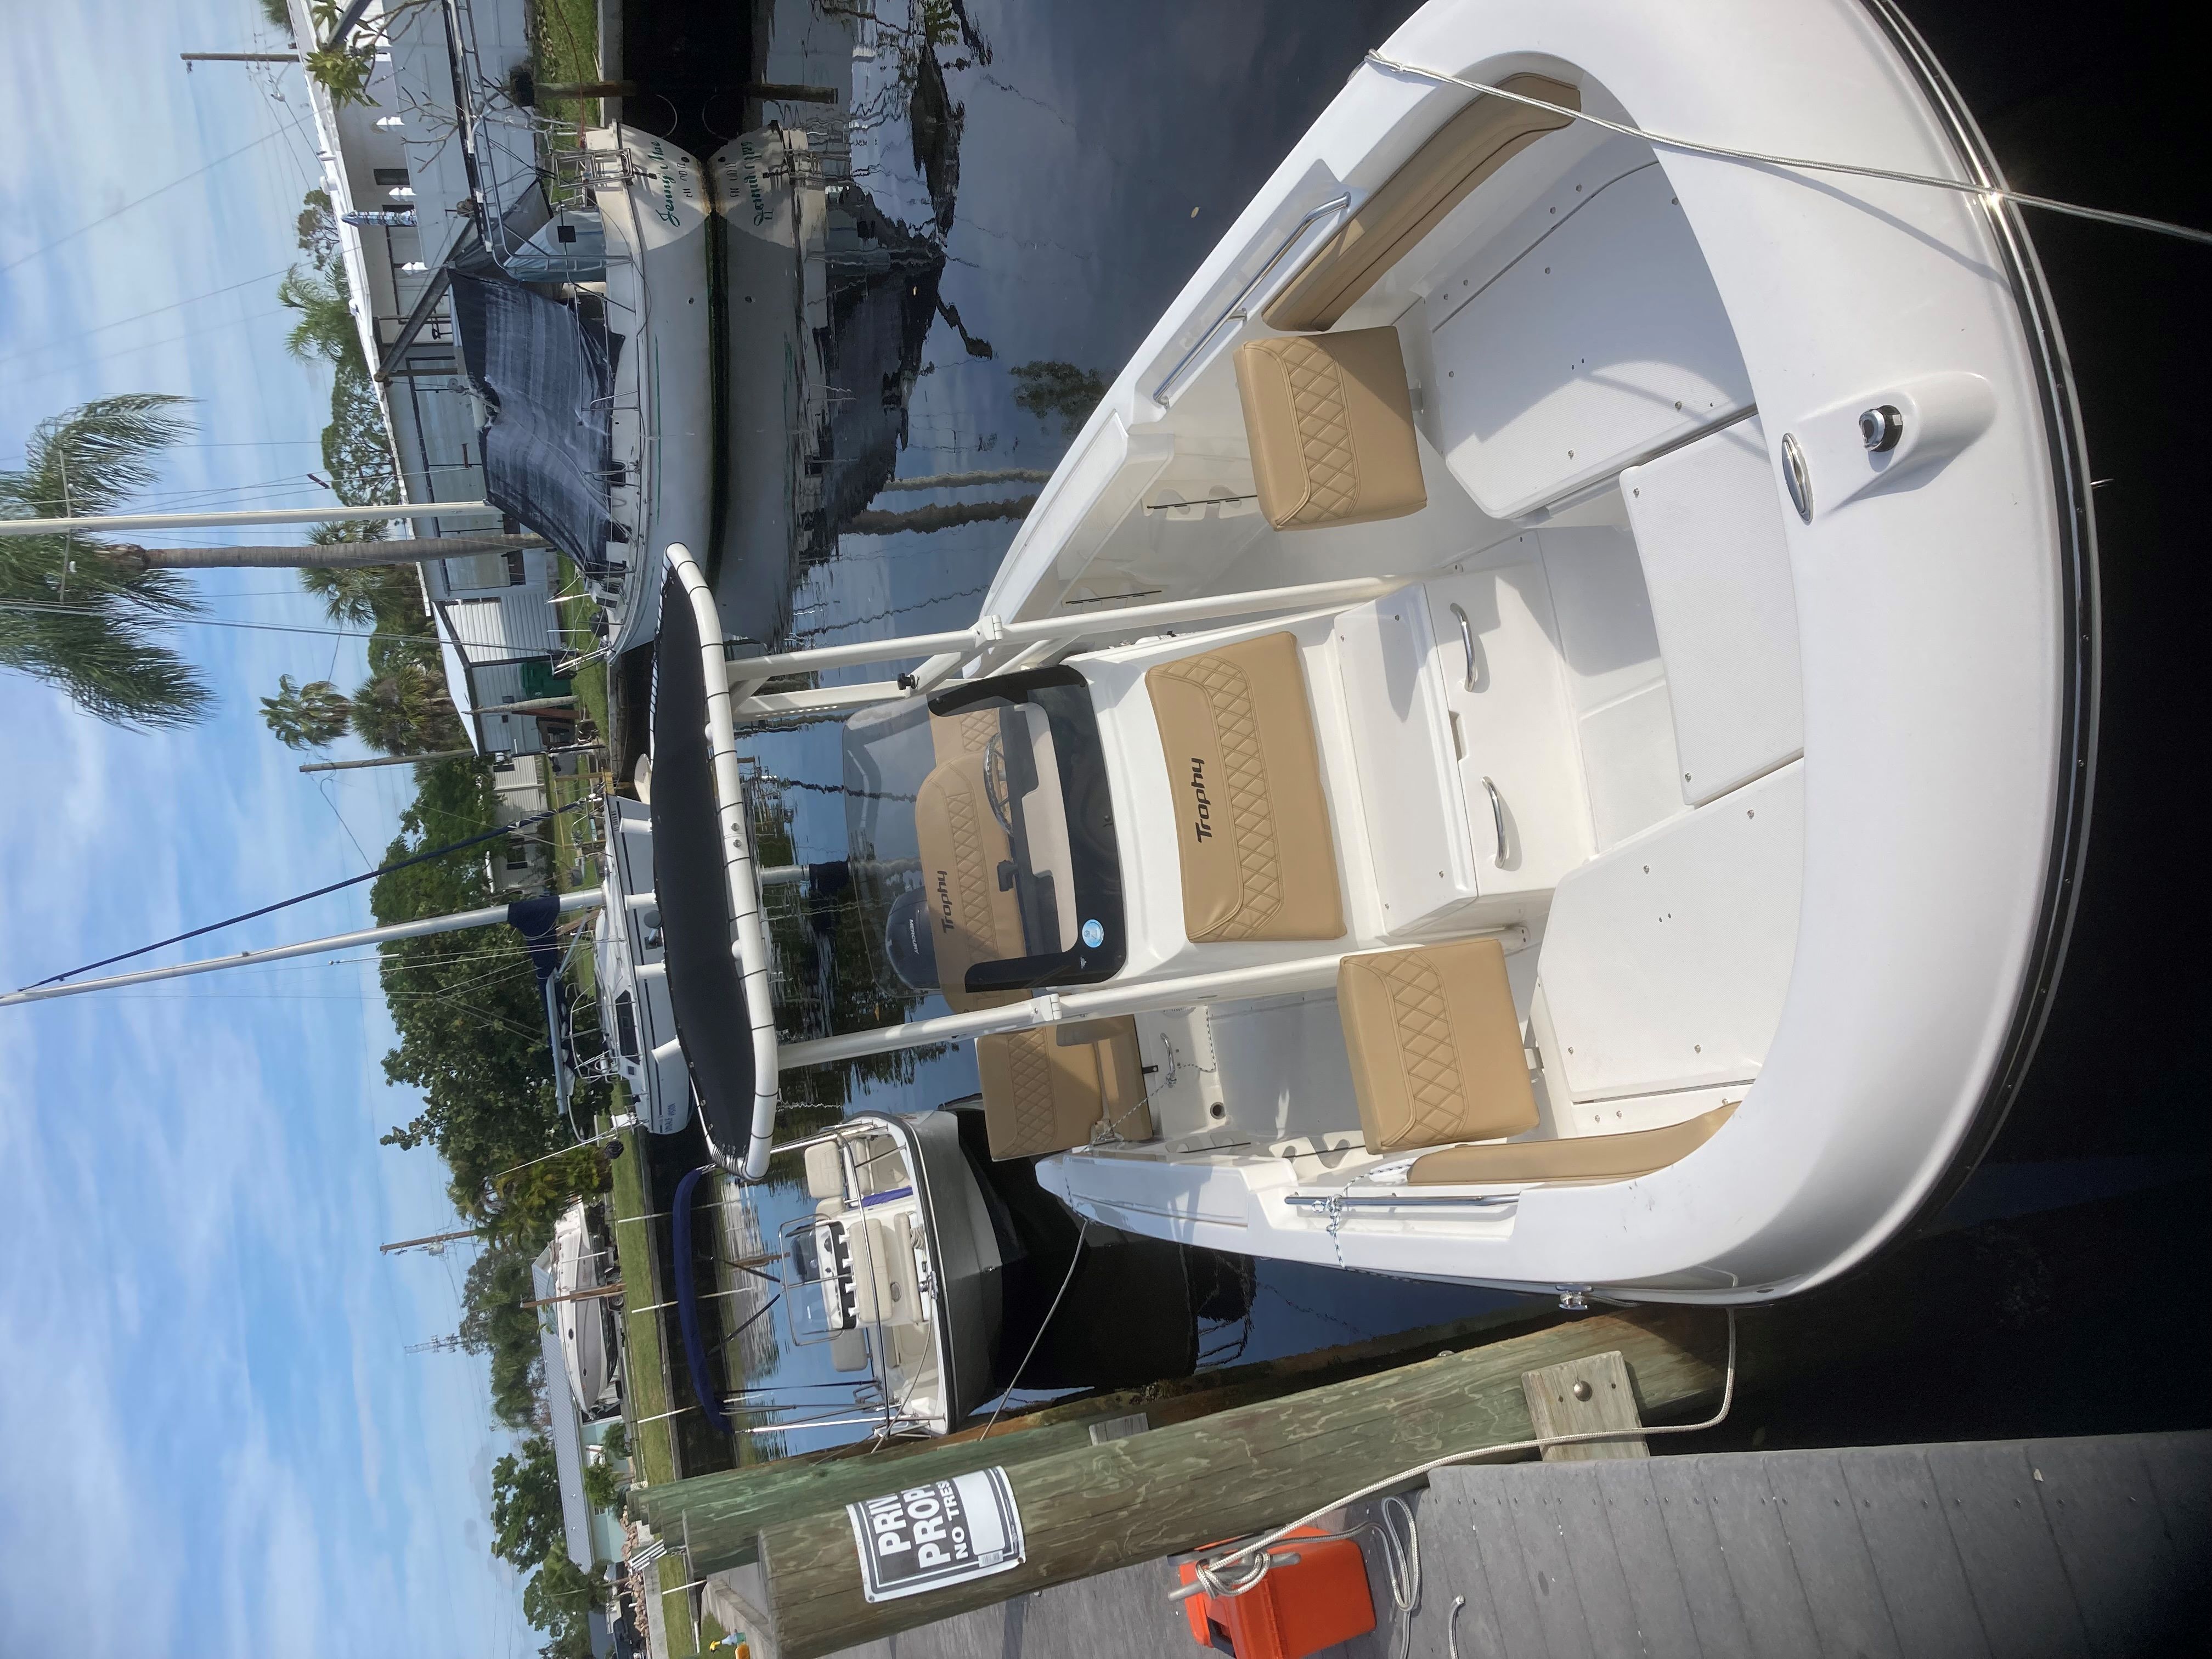 SURF DUST (22FT Bayliner Trophy 22 Center Console - 150 HP~Fishing)